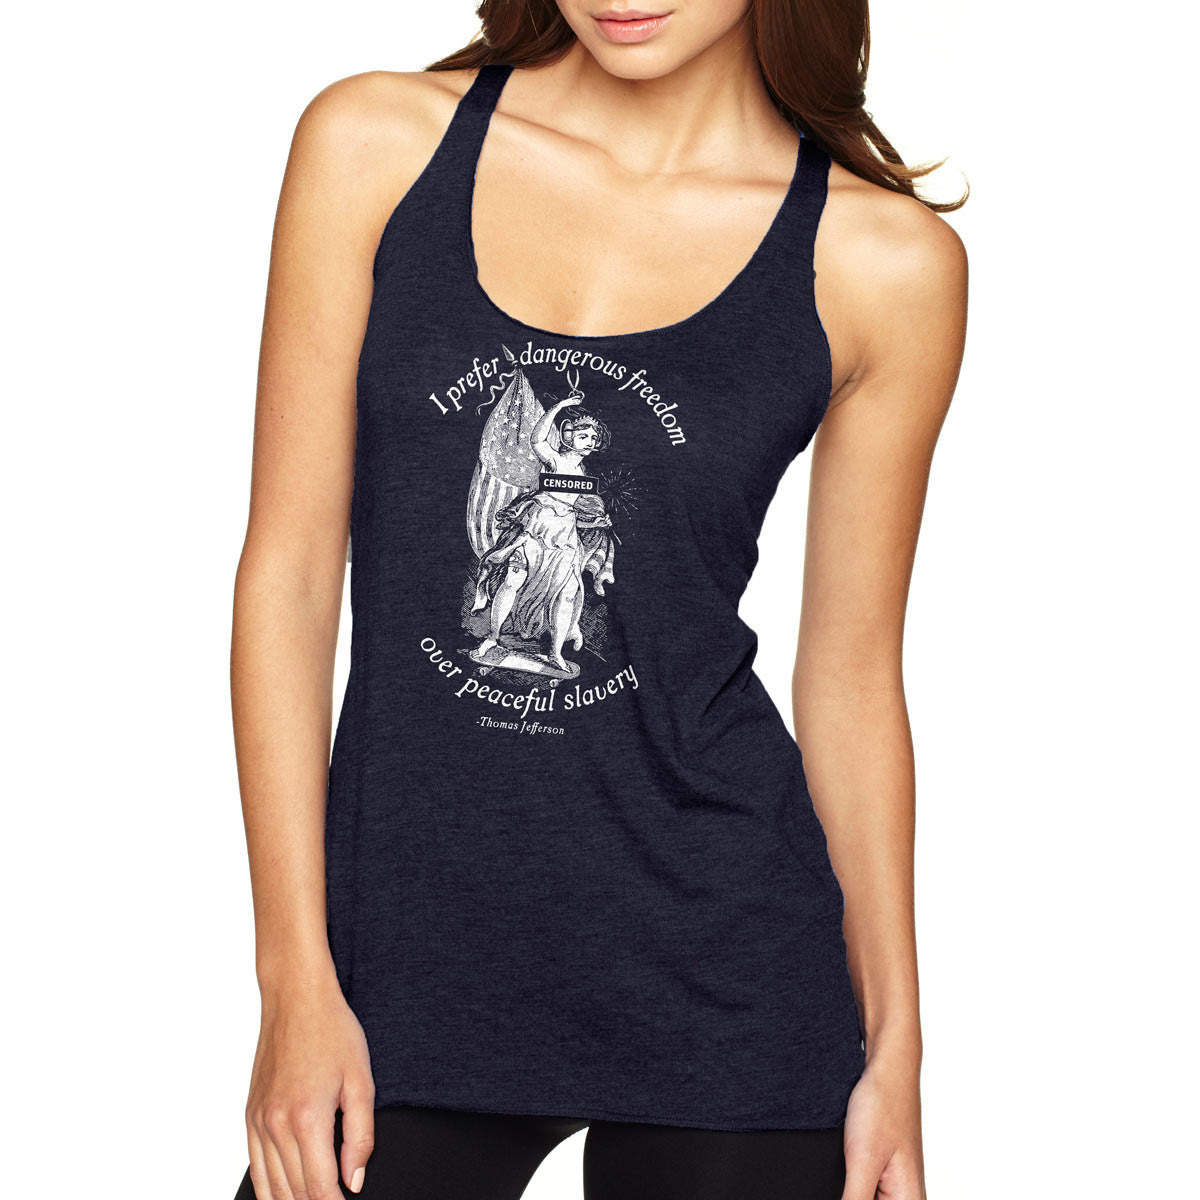 Ladies Tank Tops | Casual and Workout Tops for Women - Liberty Maniacs | Rundhalsshirts